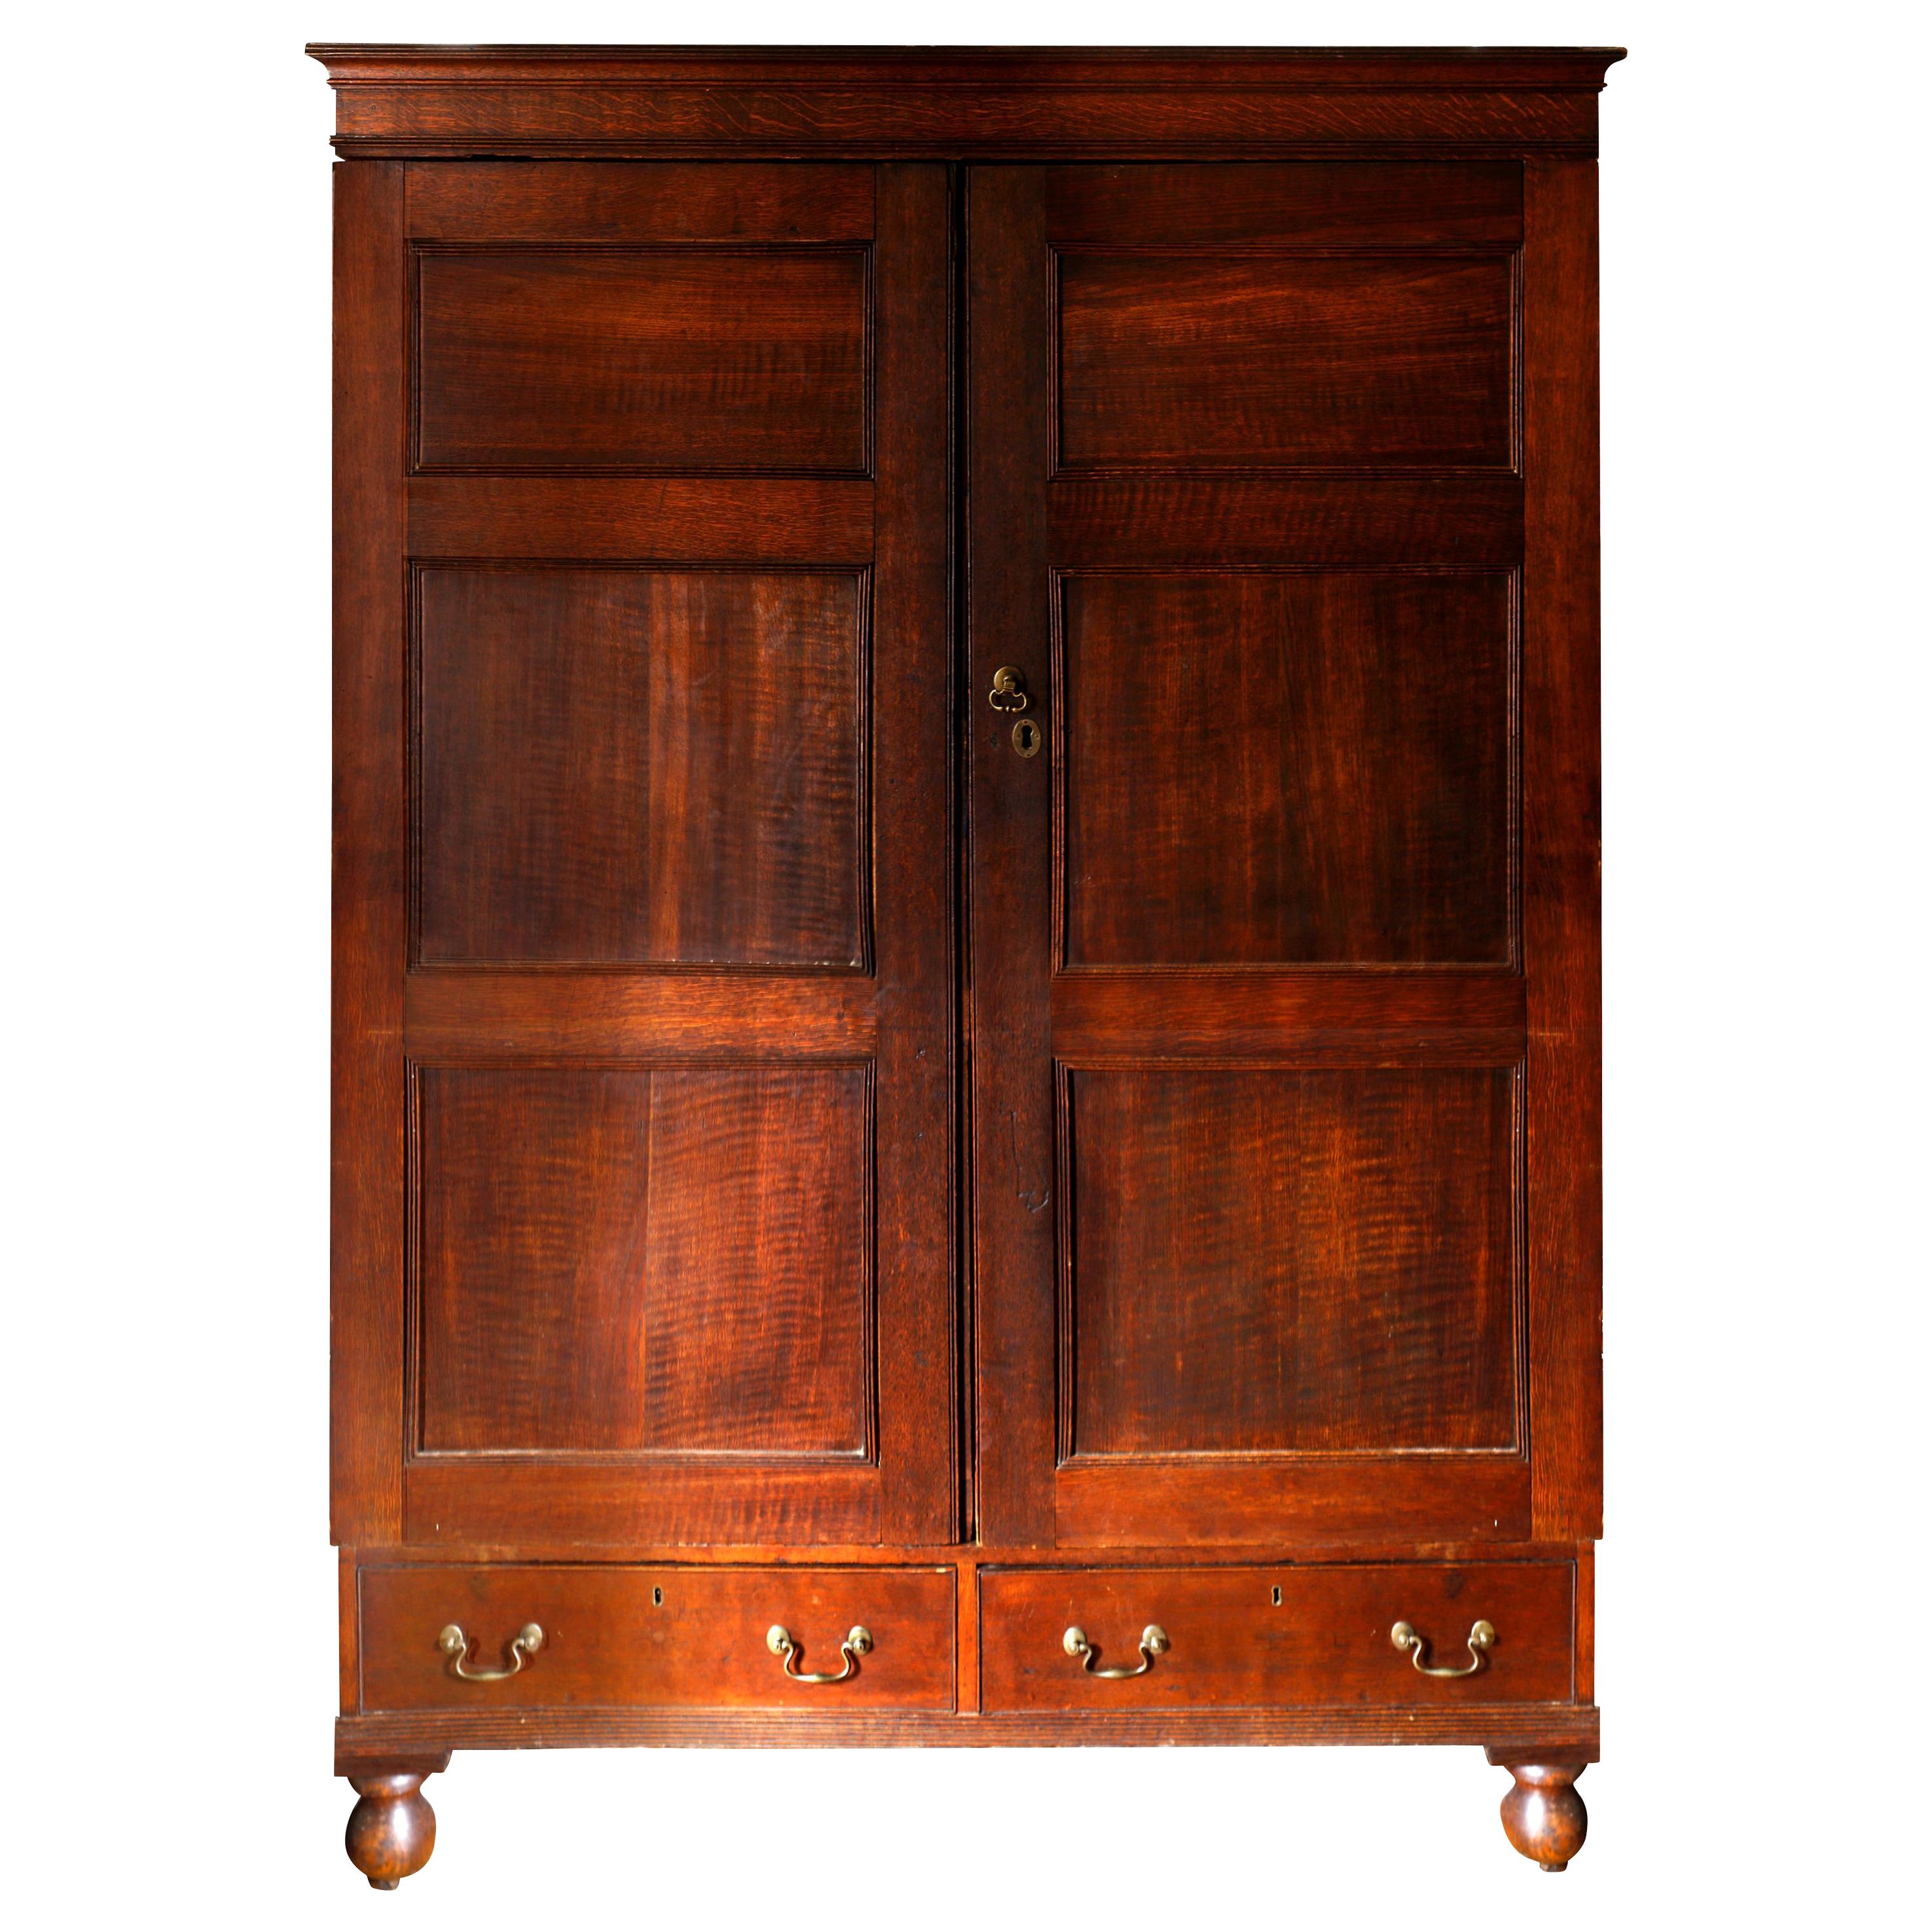 Mid-18th Century, Tiger Oak Livery Armoire